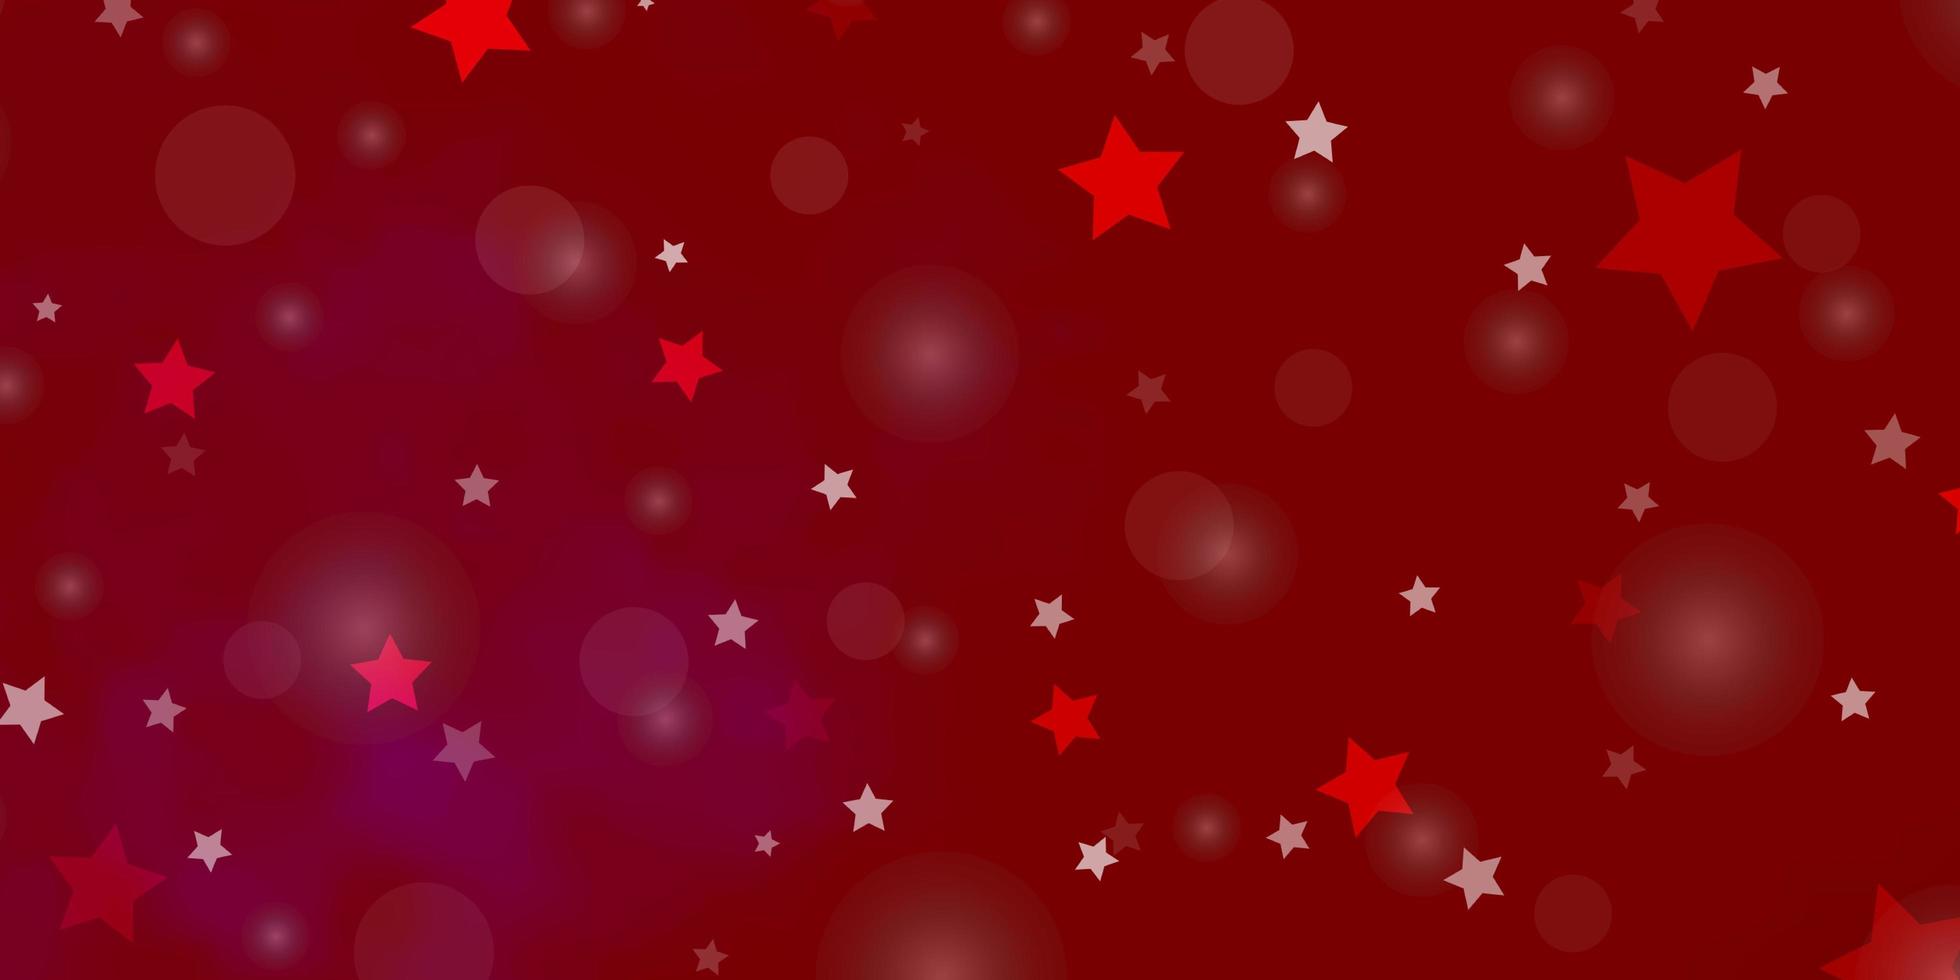 Light Pink, Red vector layout with circles, stars.